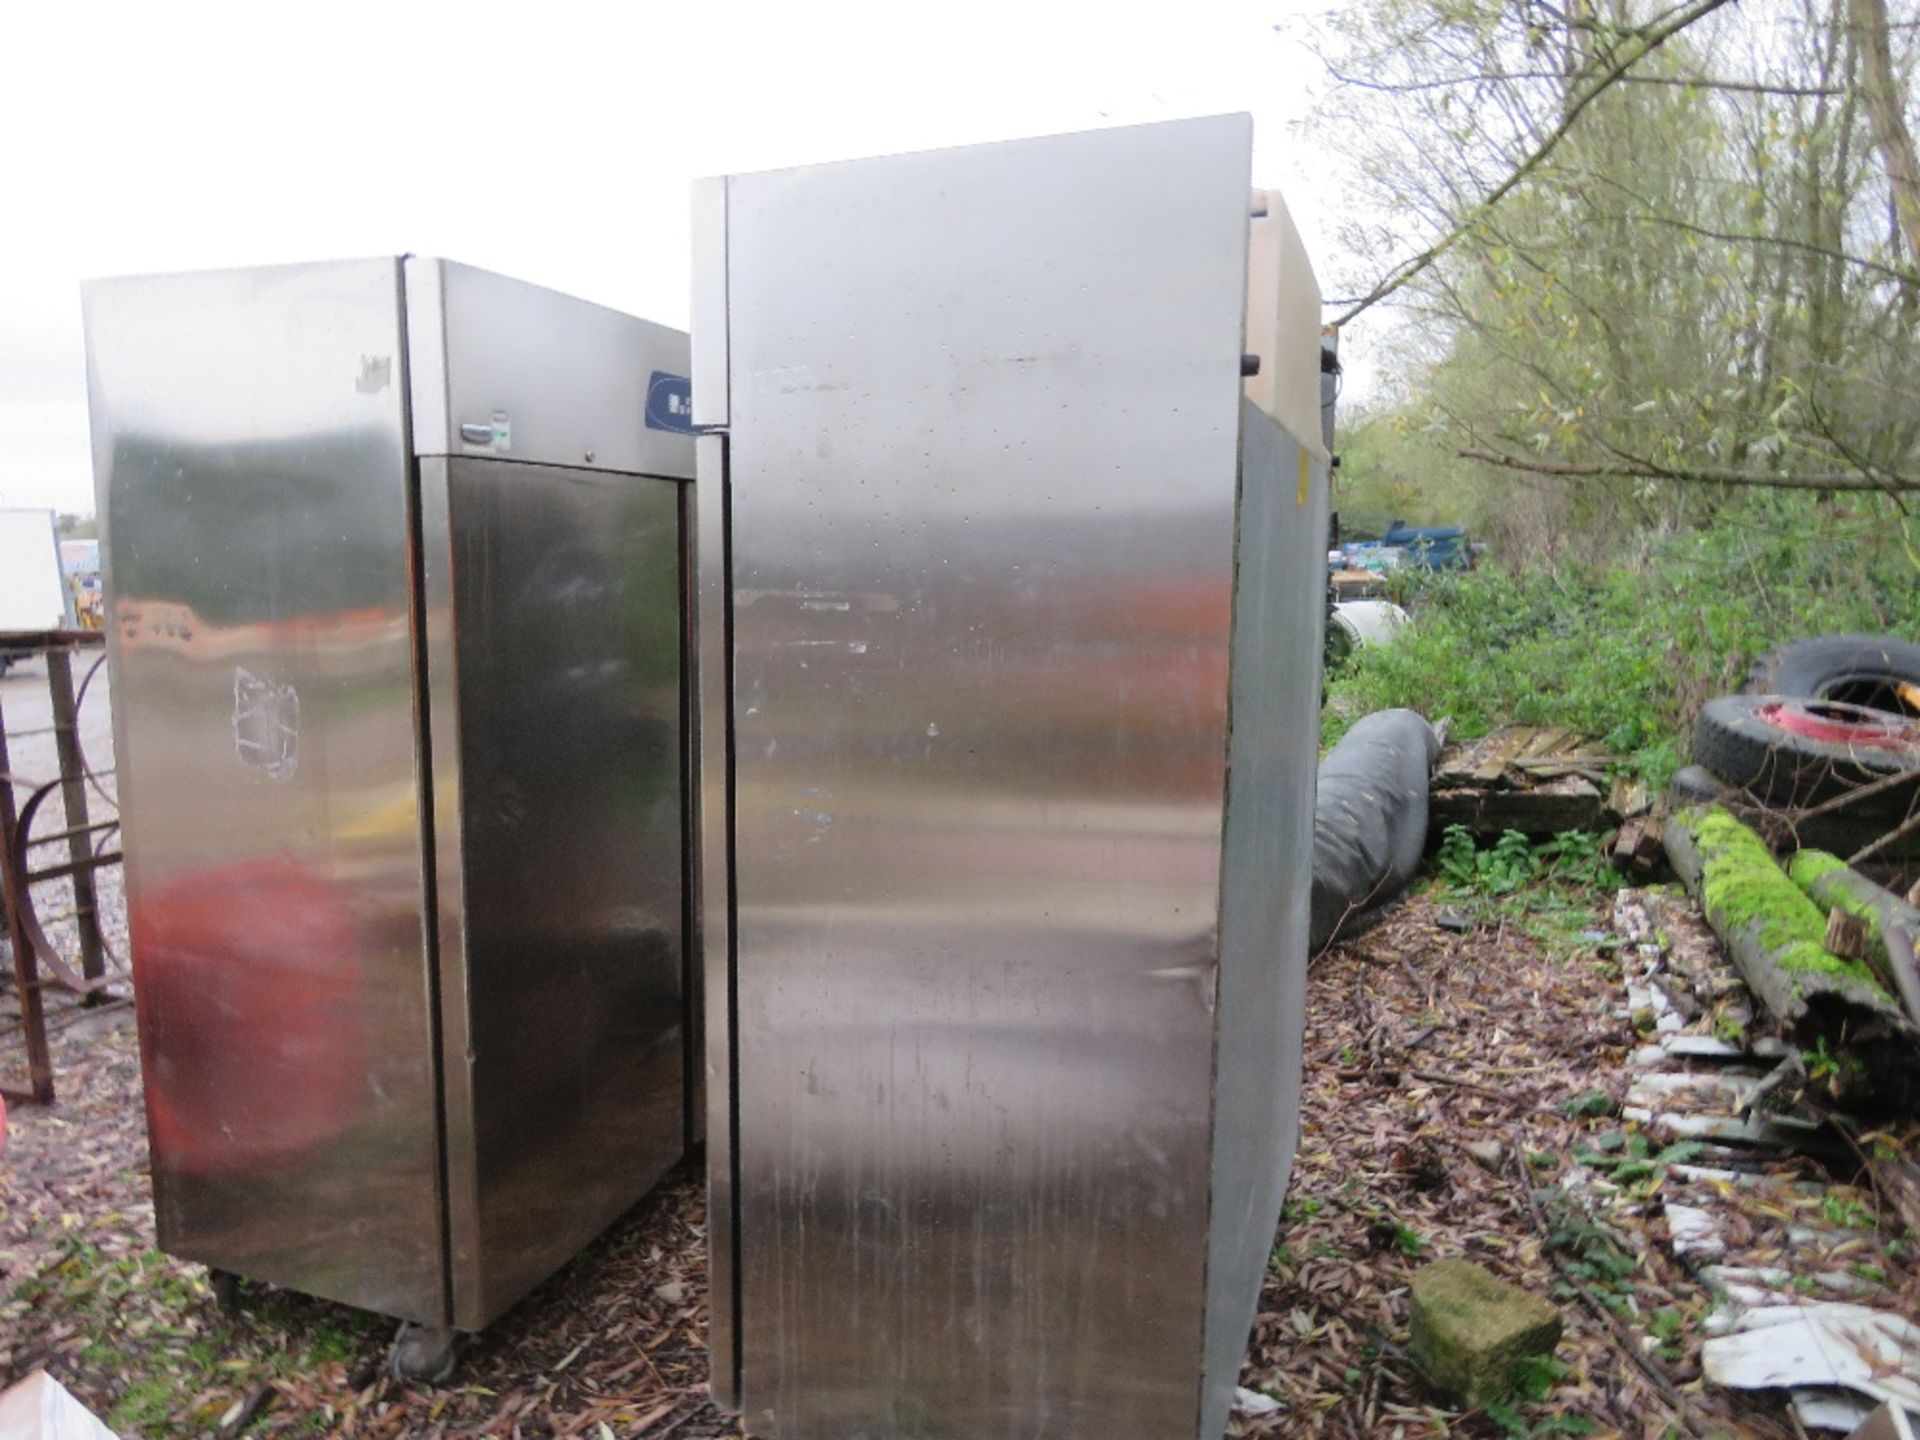 2 X LARGE CAPACITY CATERING FRIDGES DIRECT FROM CAFE SITE RE-DEVELOPMENT. WORKING WHEN RECENTLY REM - Image 2 of 6